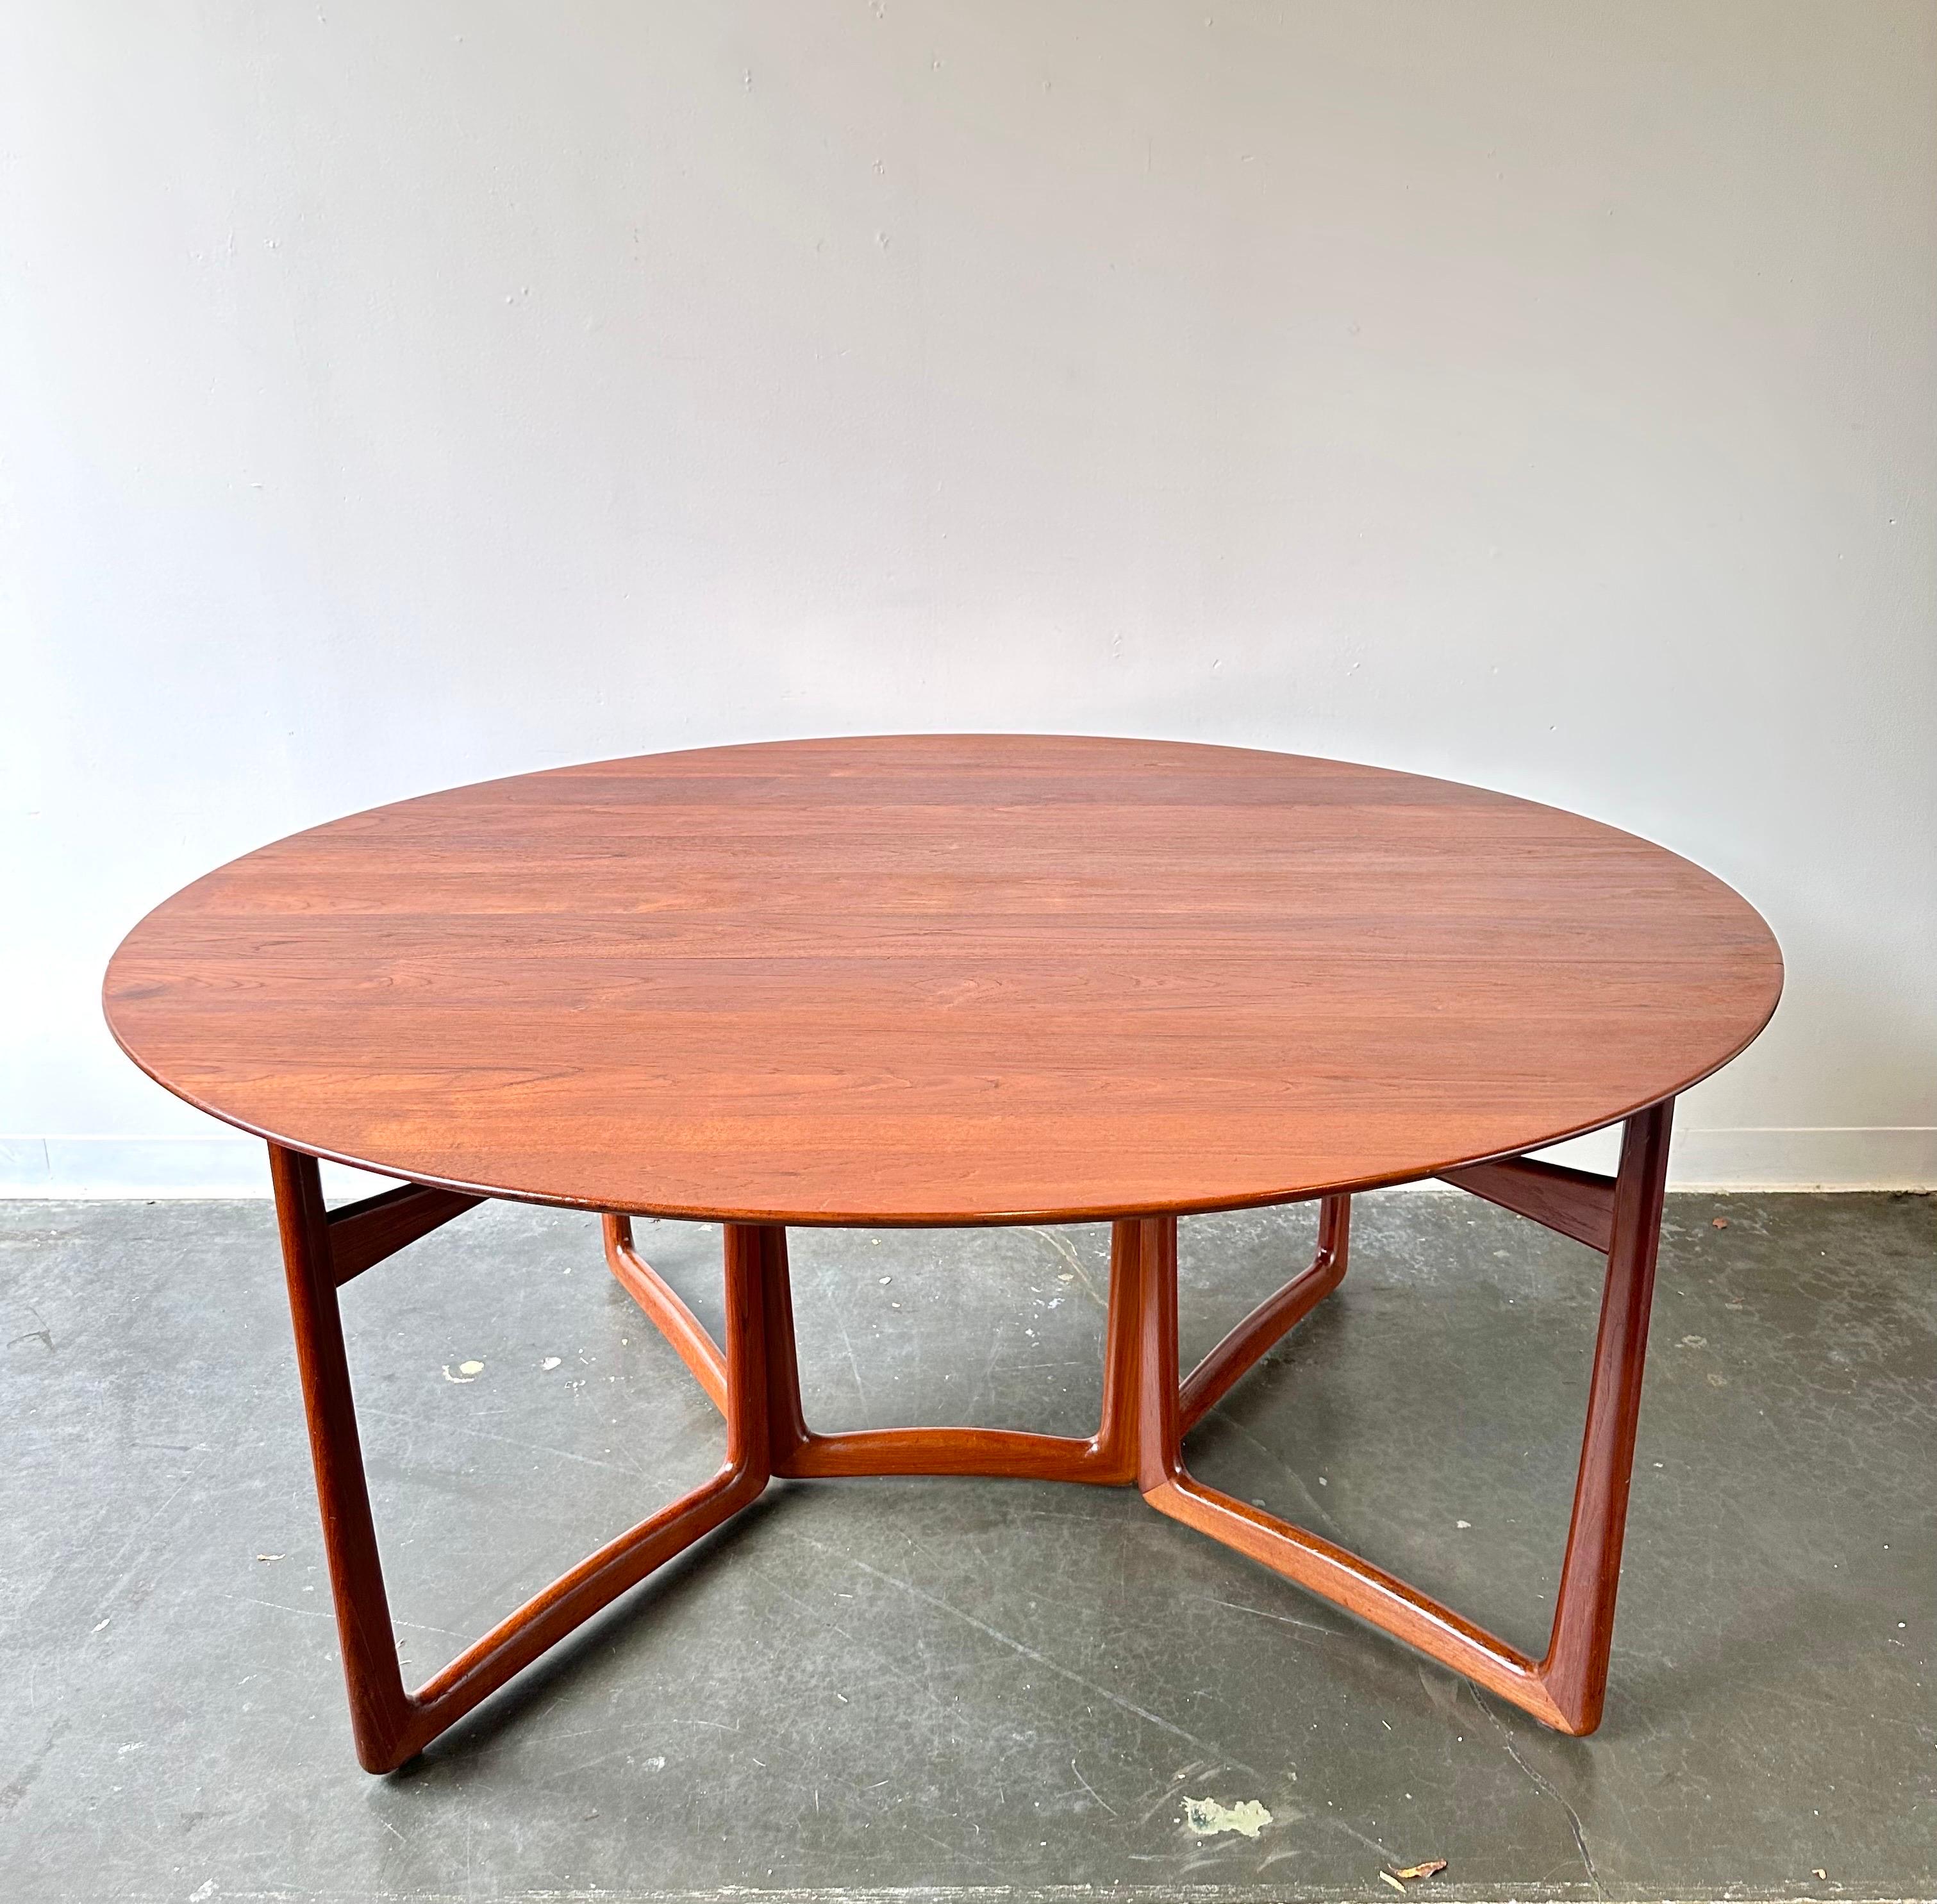 France & Son Teak Drop Leaf Dining Table Designed by Peter Hvidt & Orla Mølgaard Nielsen.

Gorgeous collectors dining table with a refinished top.
Collapsable table that makes the perfect space saver.

Open: 64ʺ L × 58ʺ D × 28 1/2ʺ H
Closed: 64